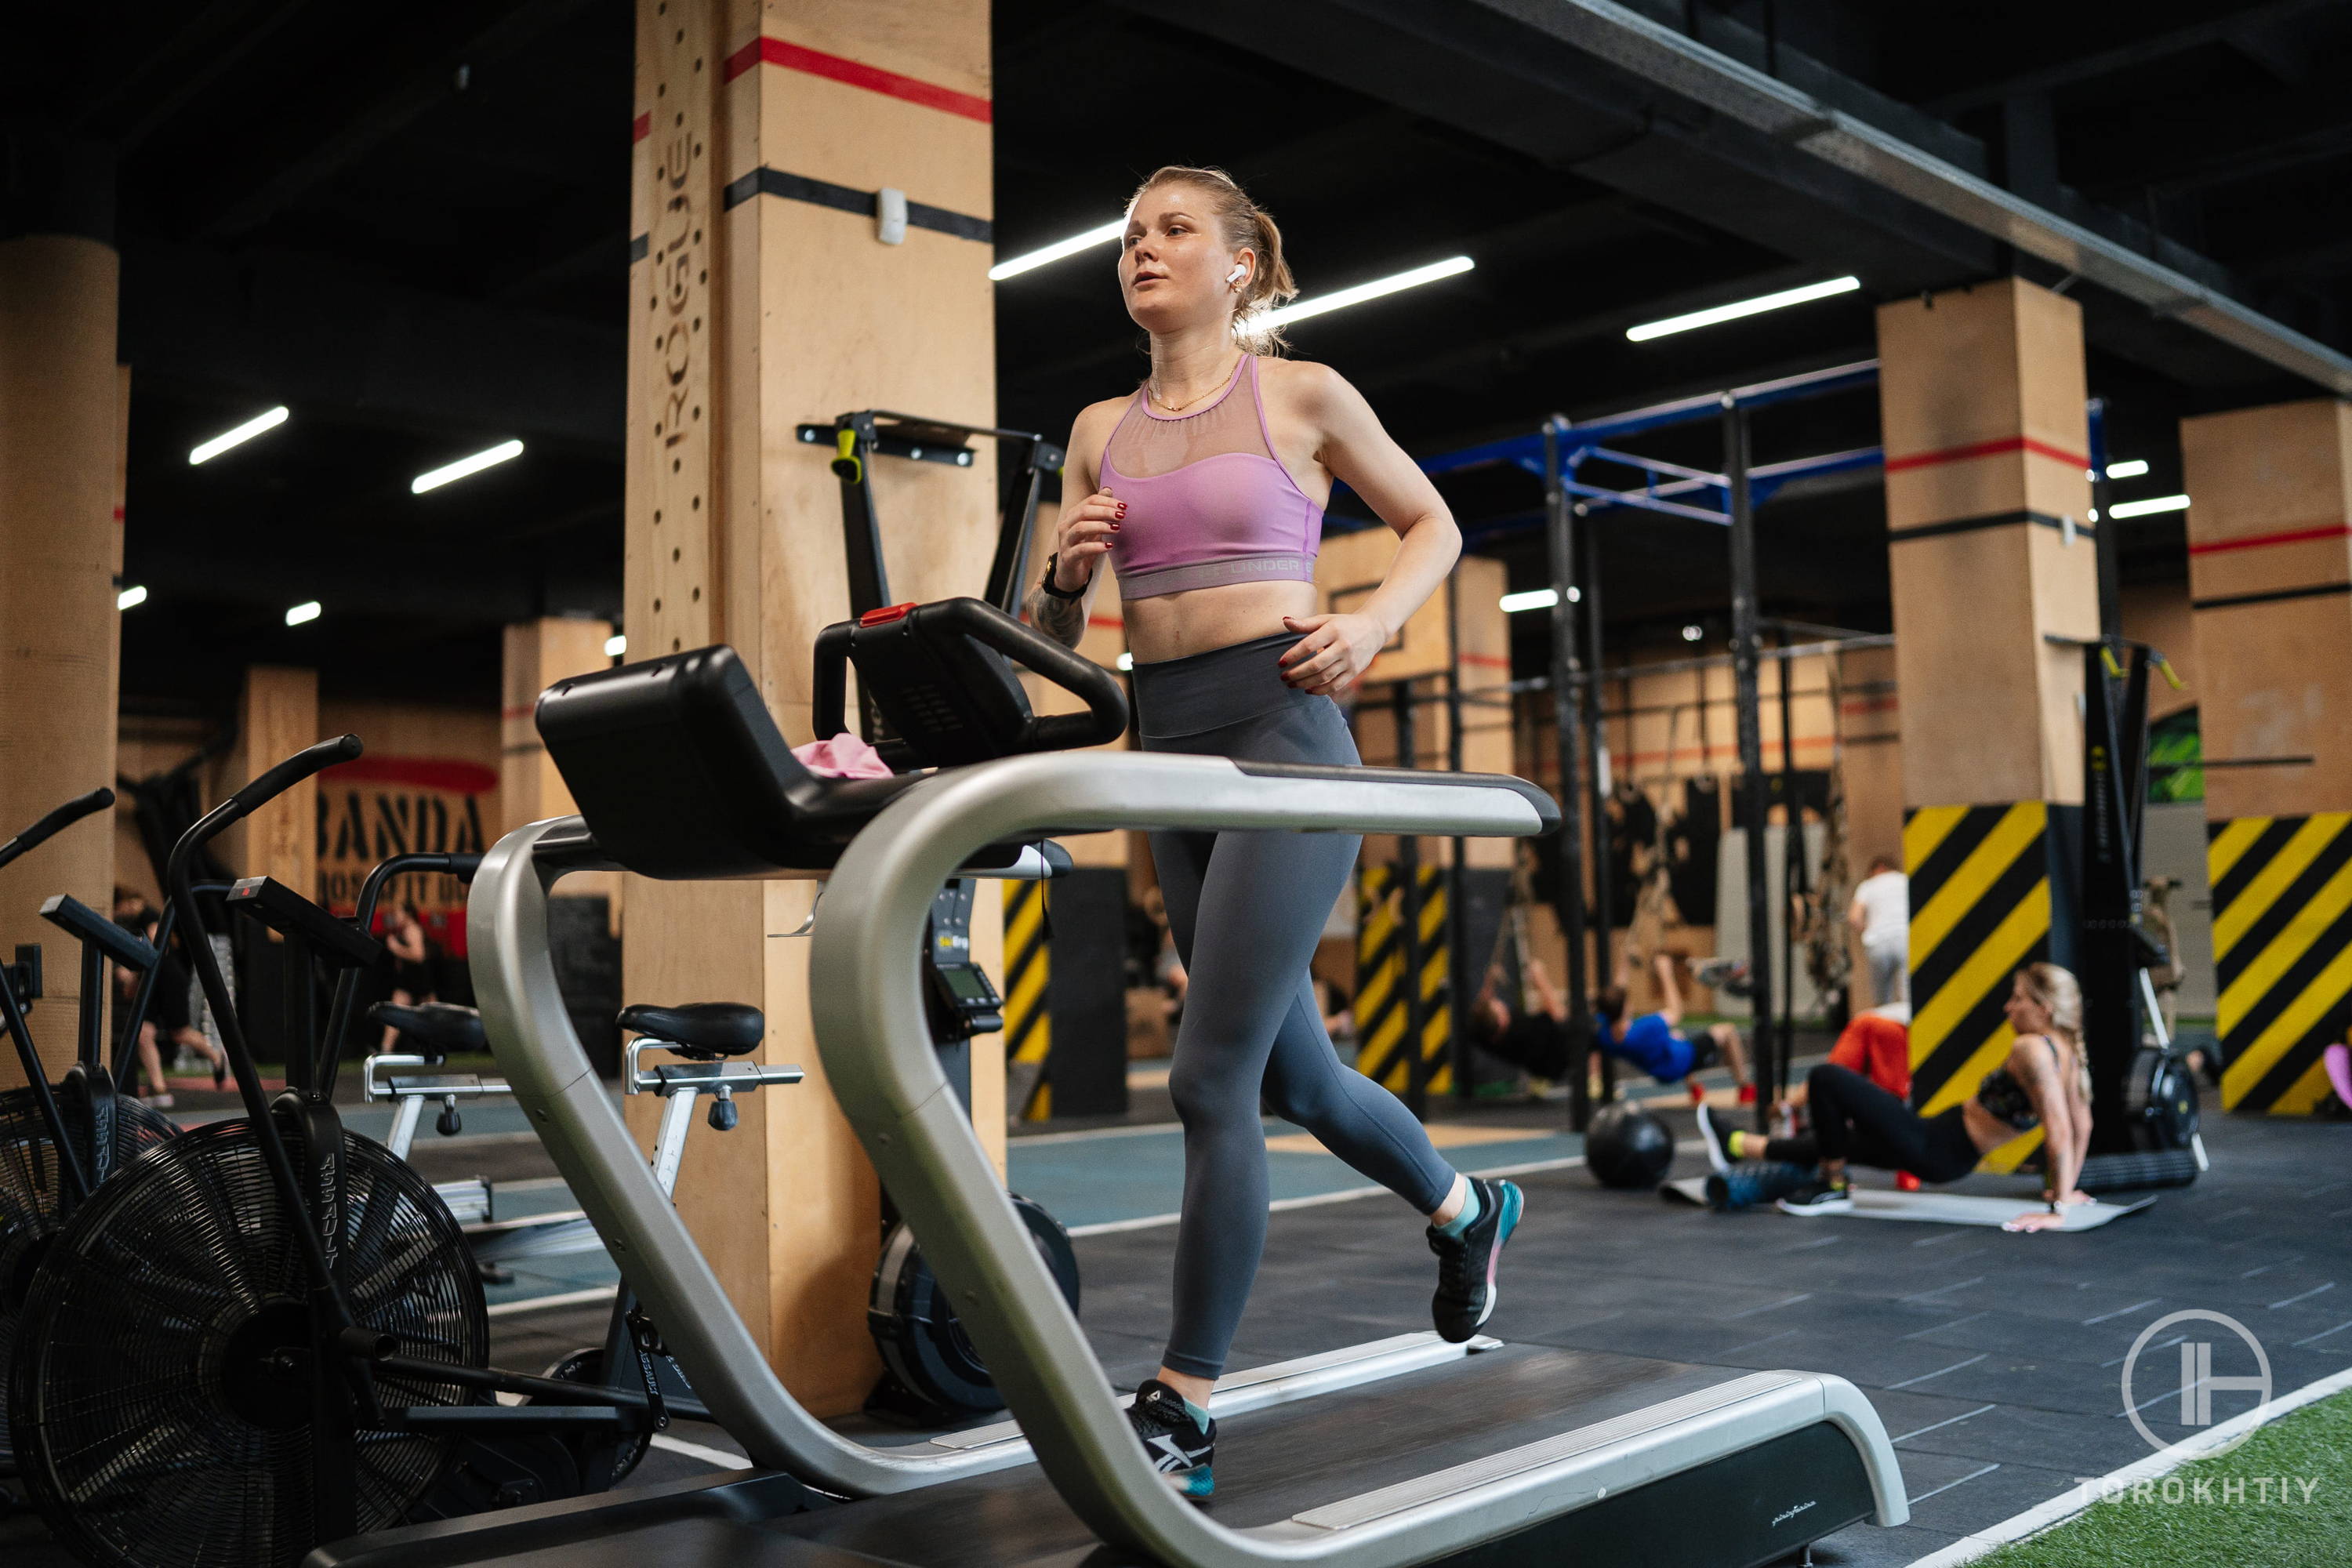 female athlete in pink top running on proform city l6 treadmill in gym